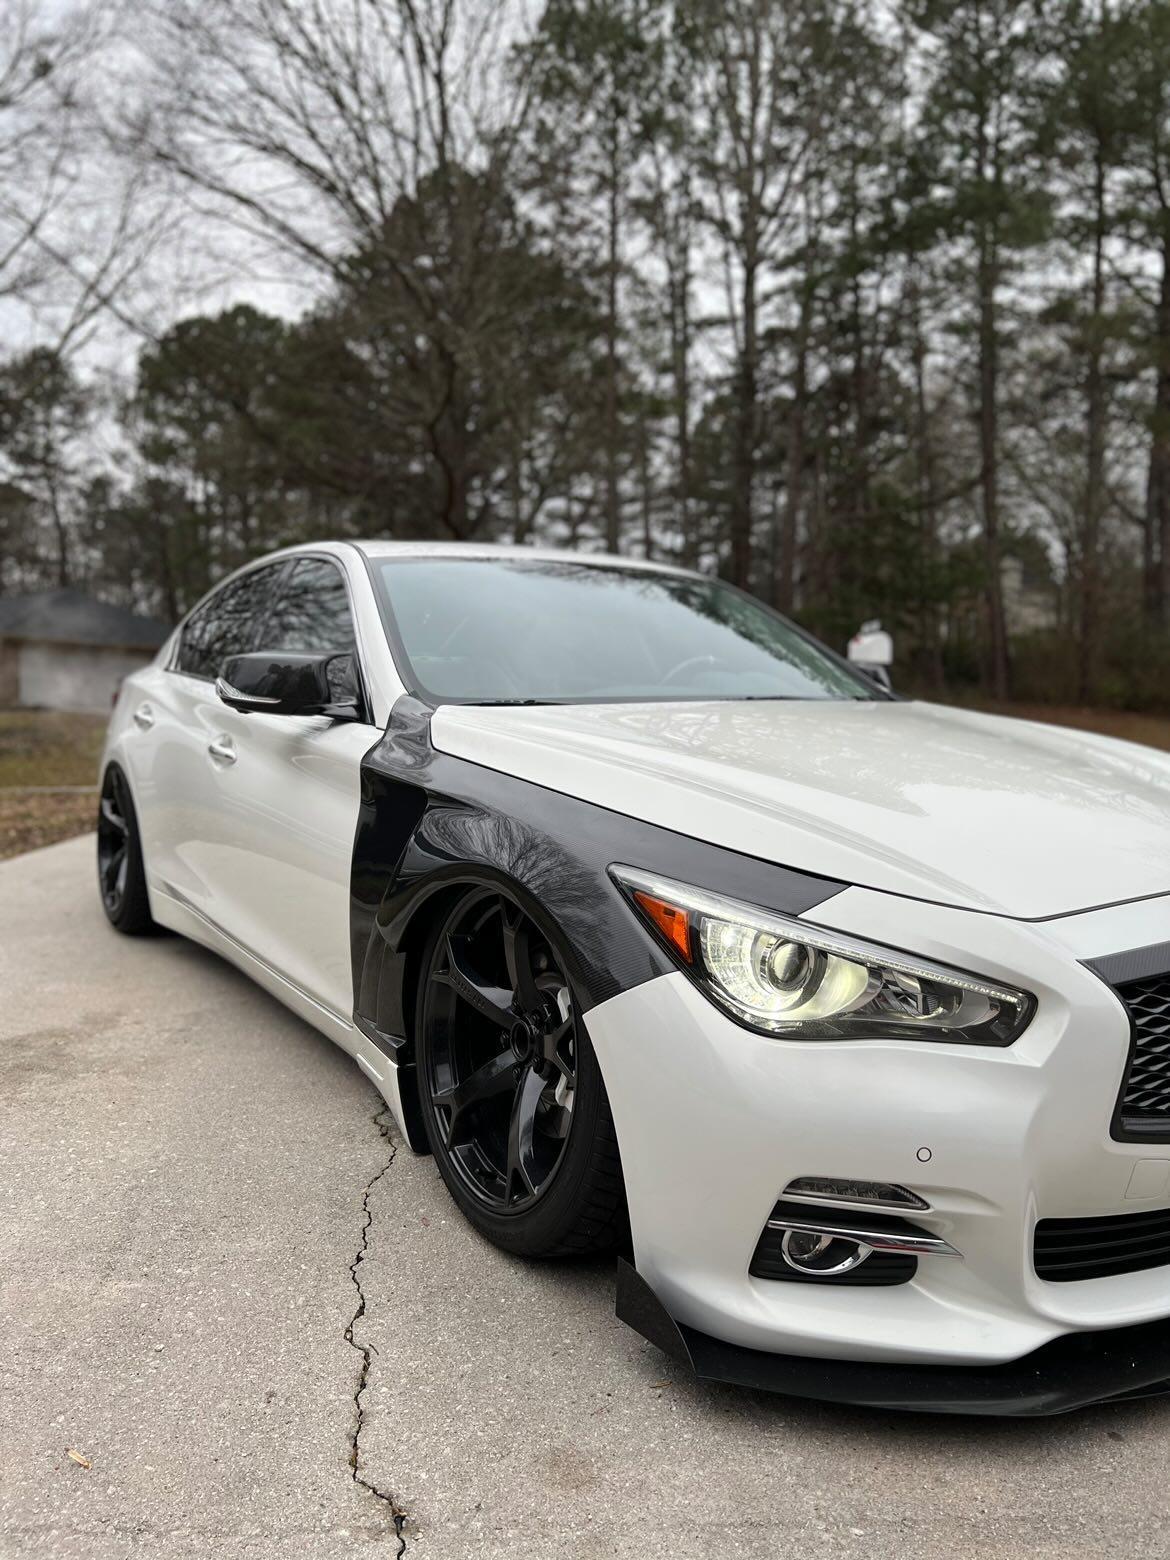 "Infiniti Q50 upgraded with JCF Vented Carbon Fiber Fenders, illustrating a fusion of style and function.